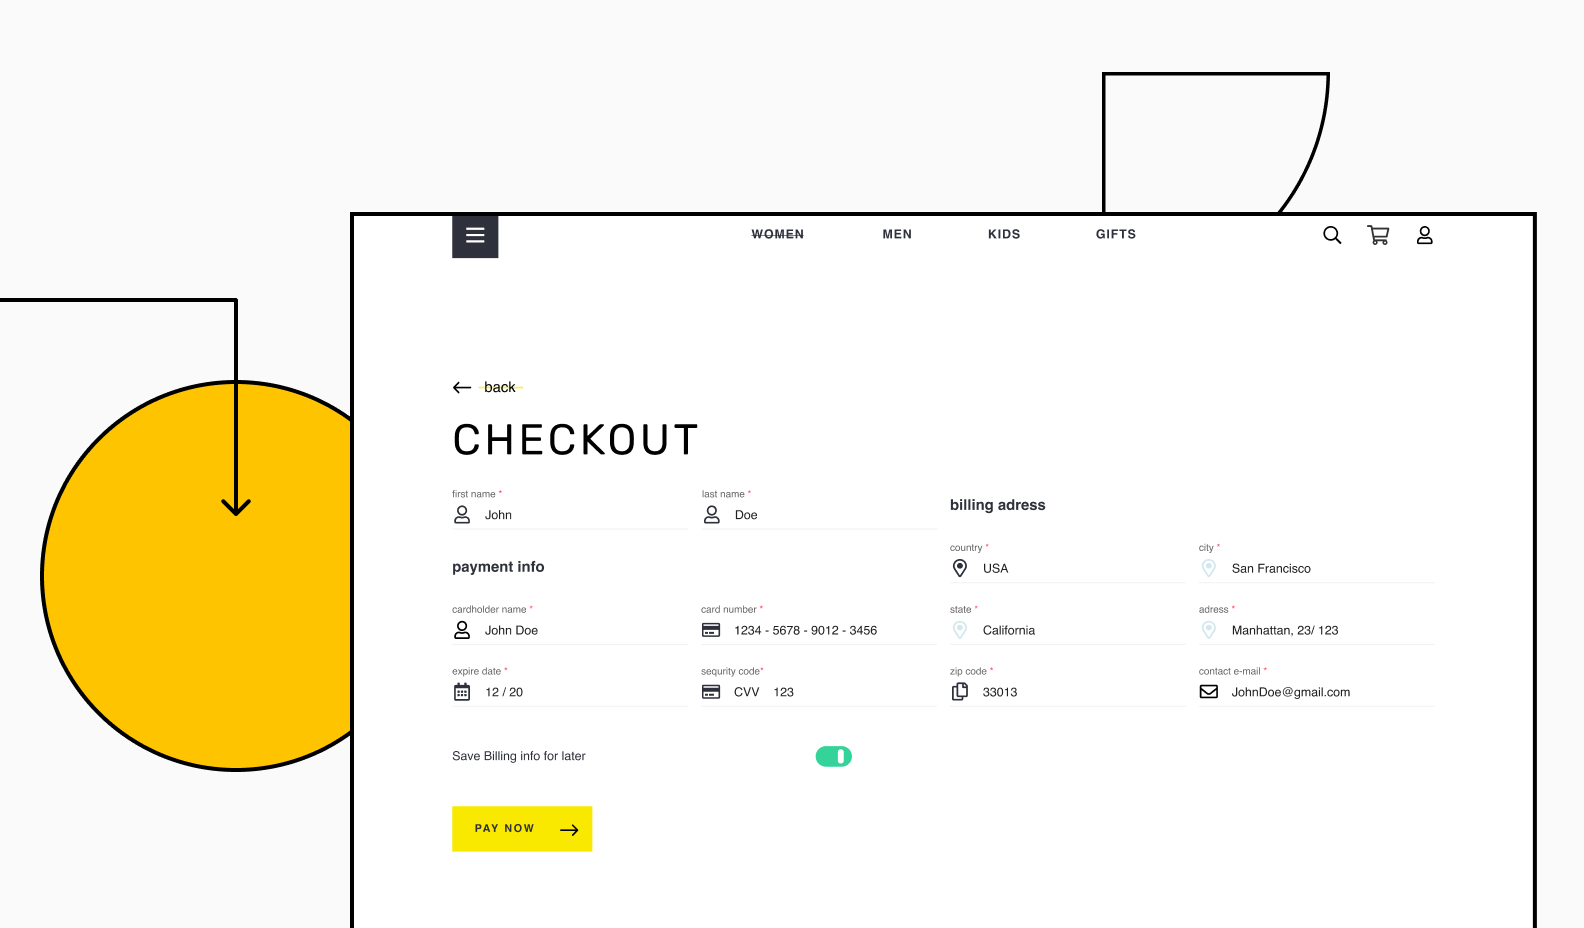 Product checkout page on an ecommerce website